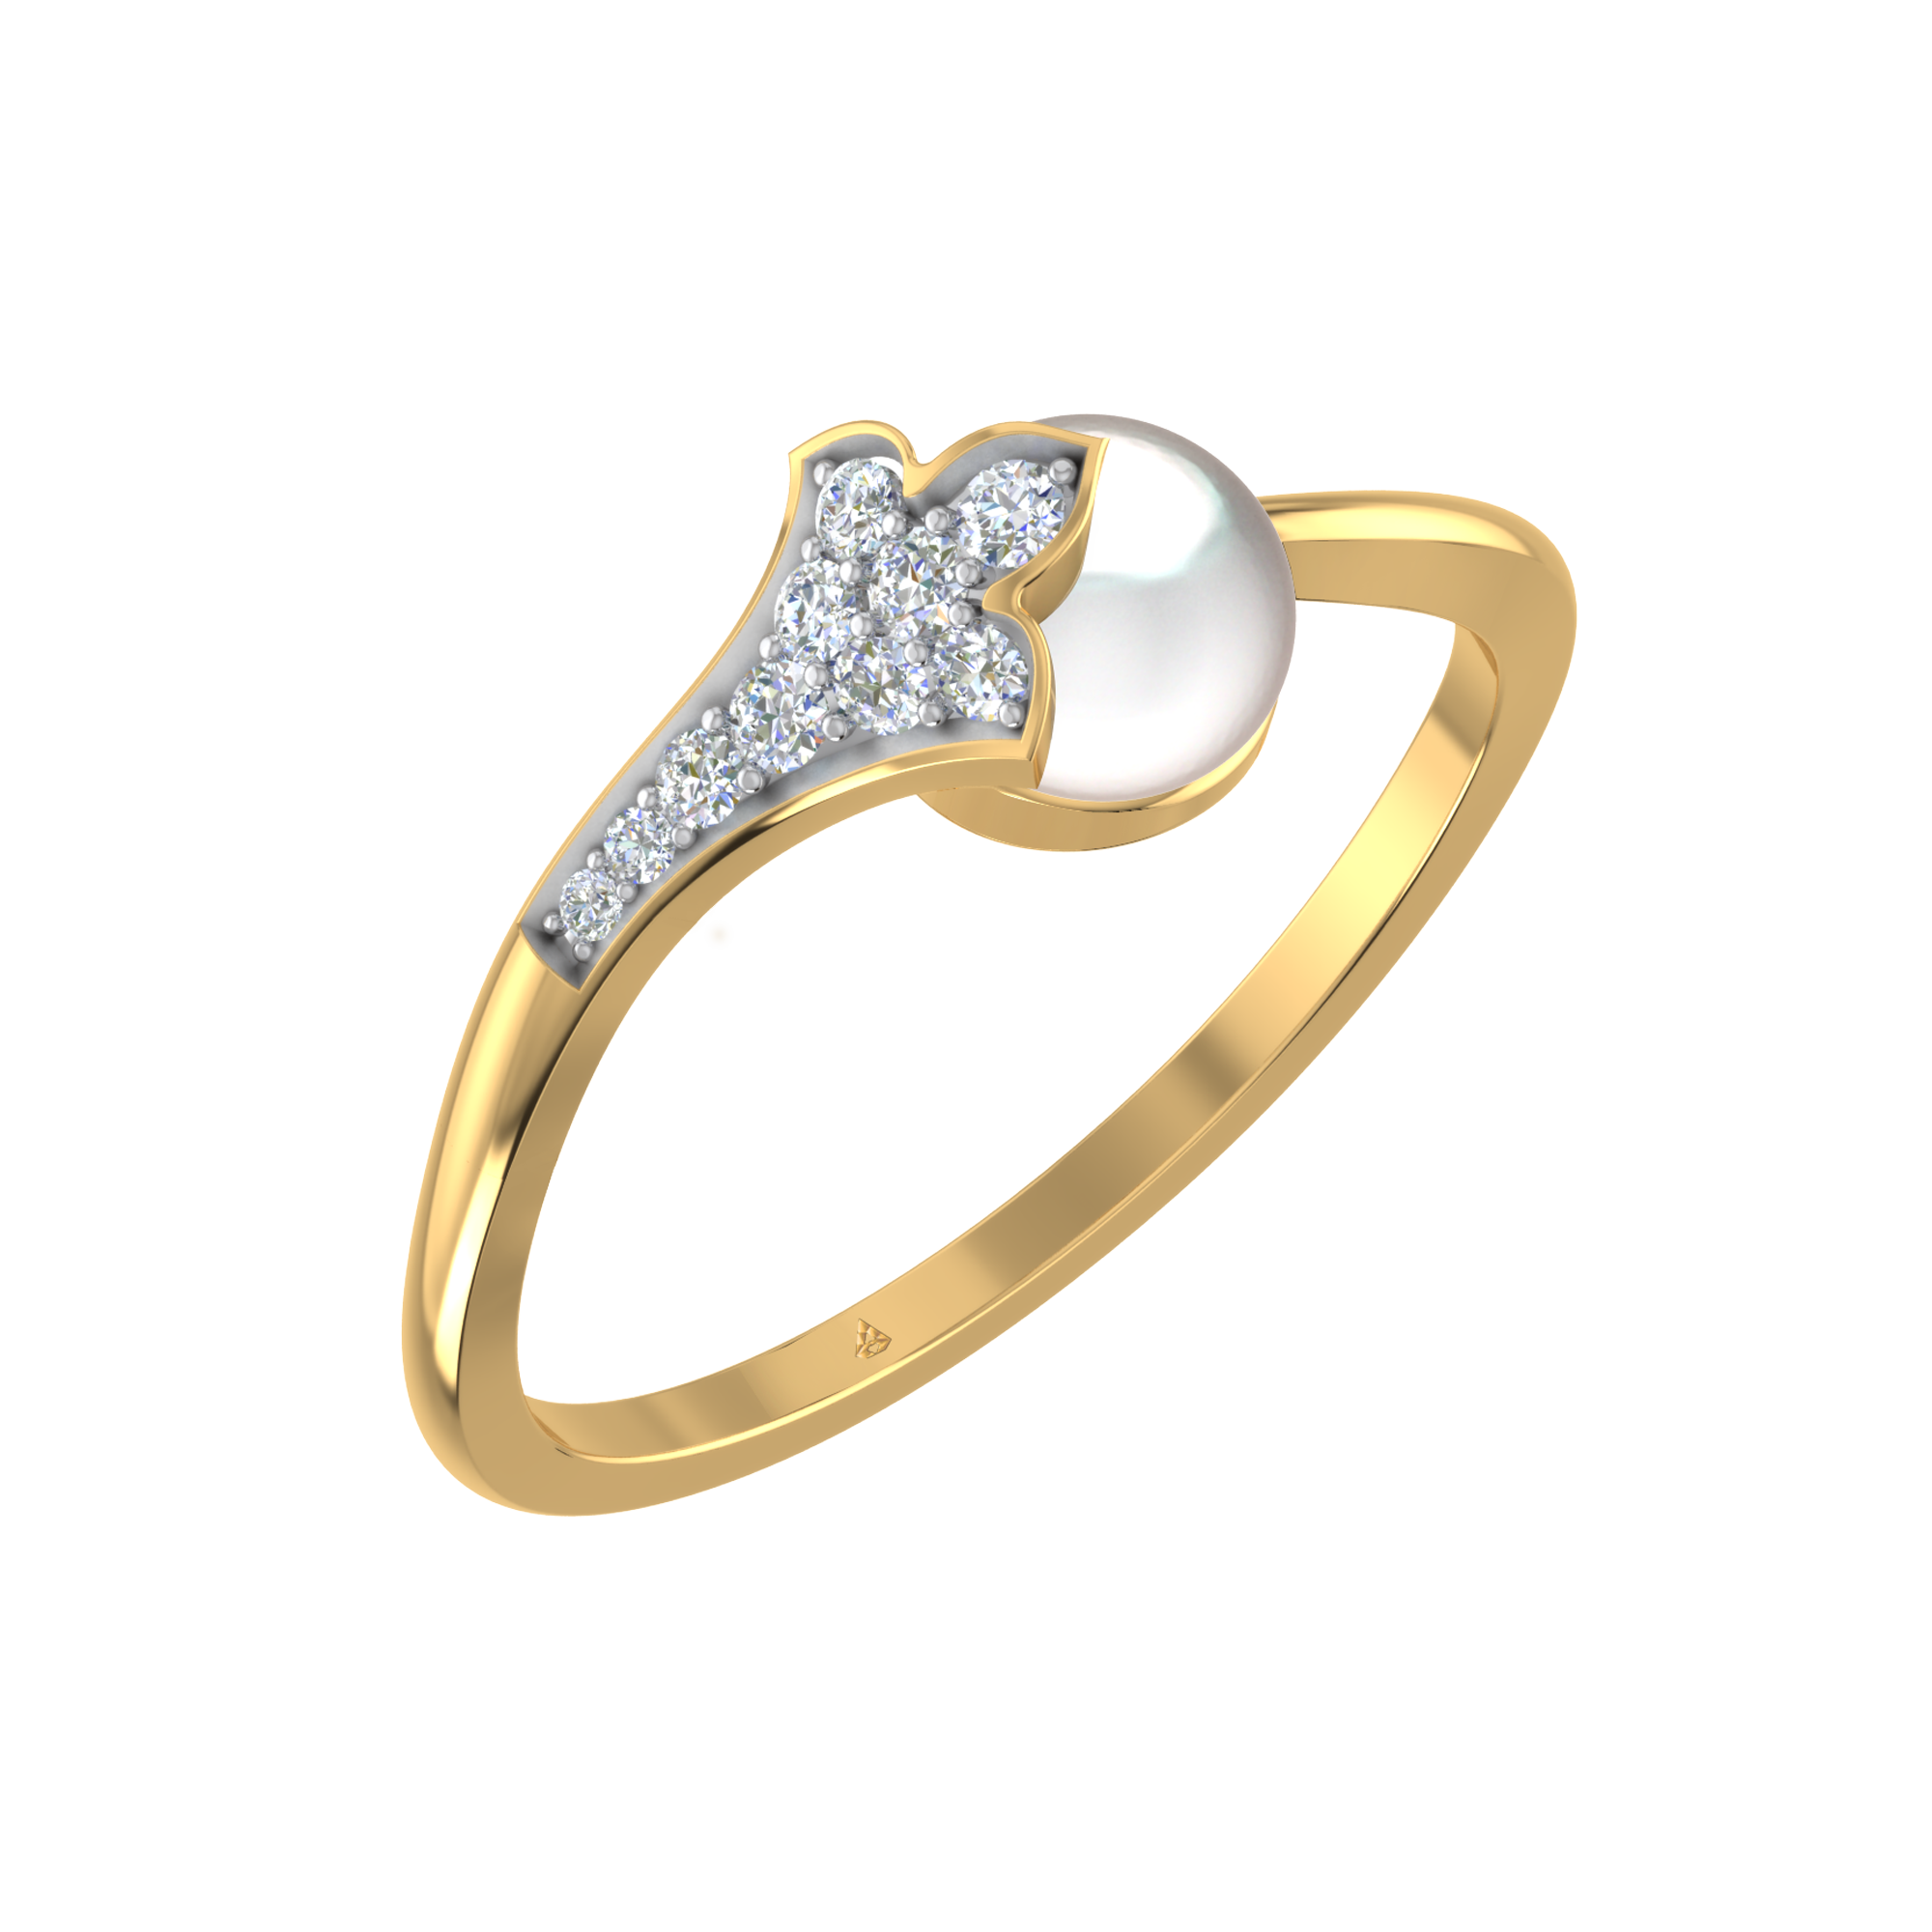 New flower pearl ring women gold| Alibaba.com